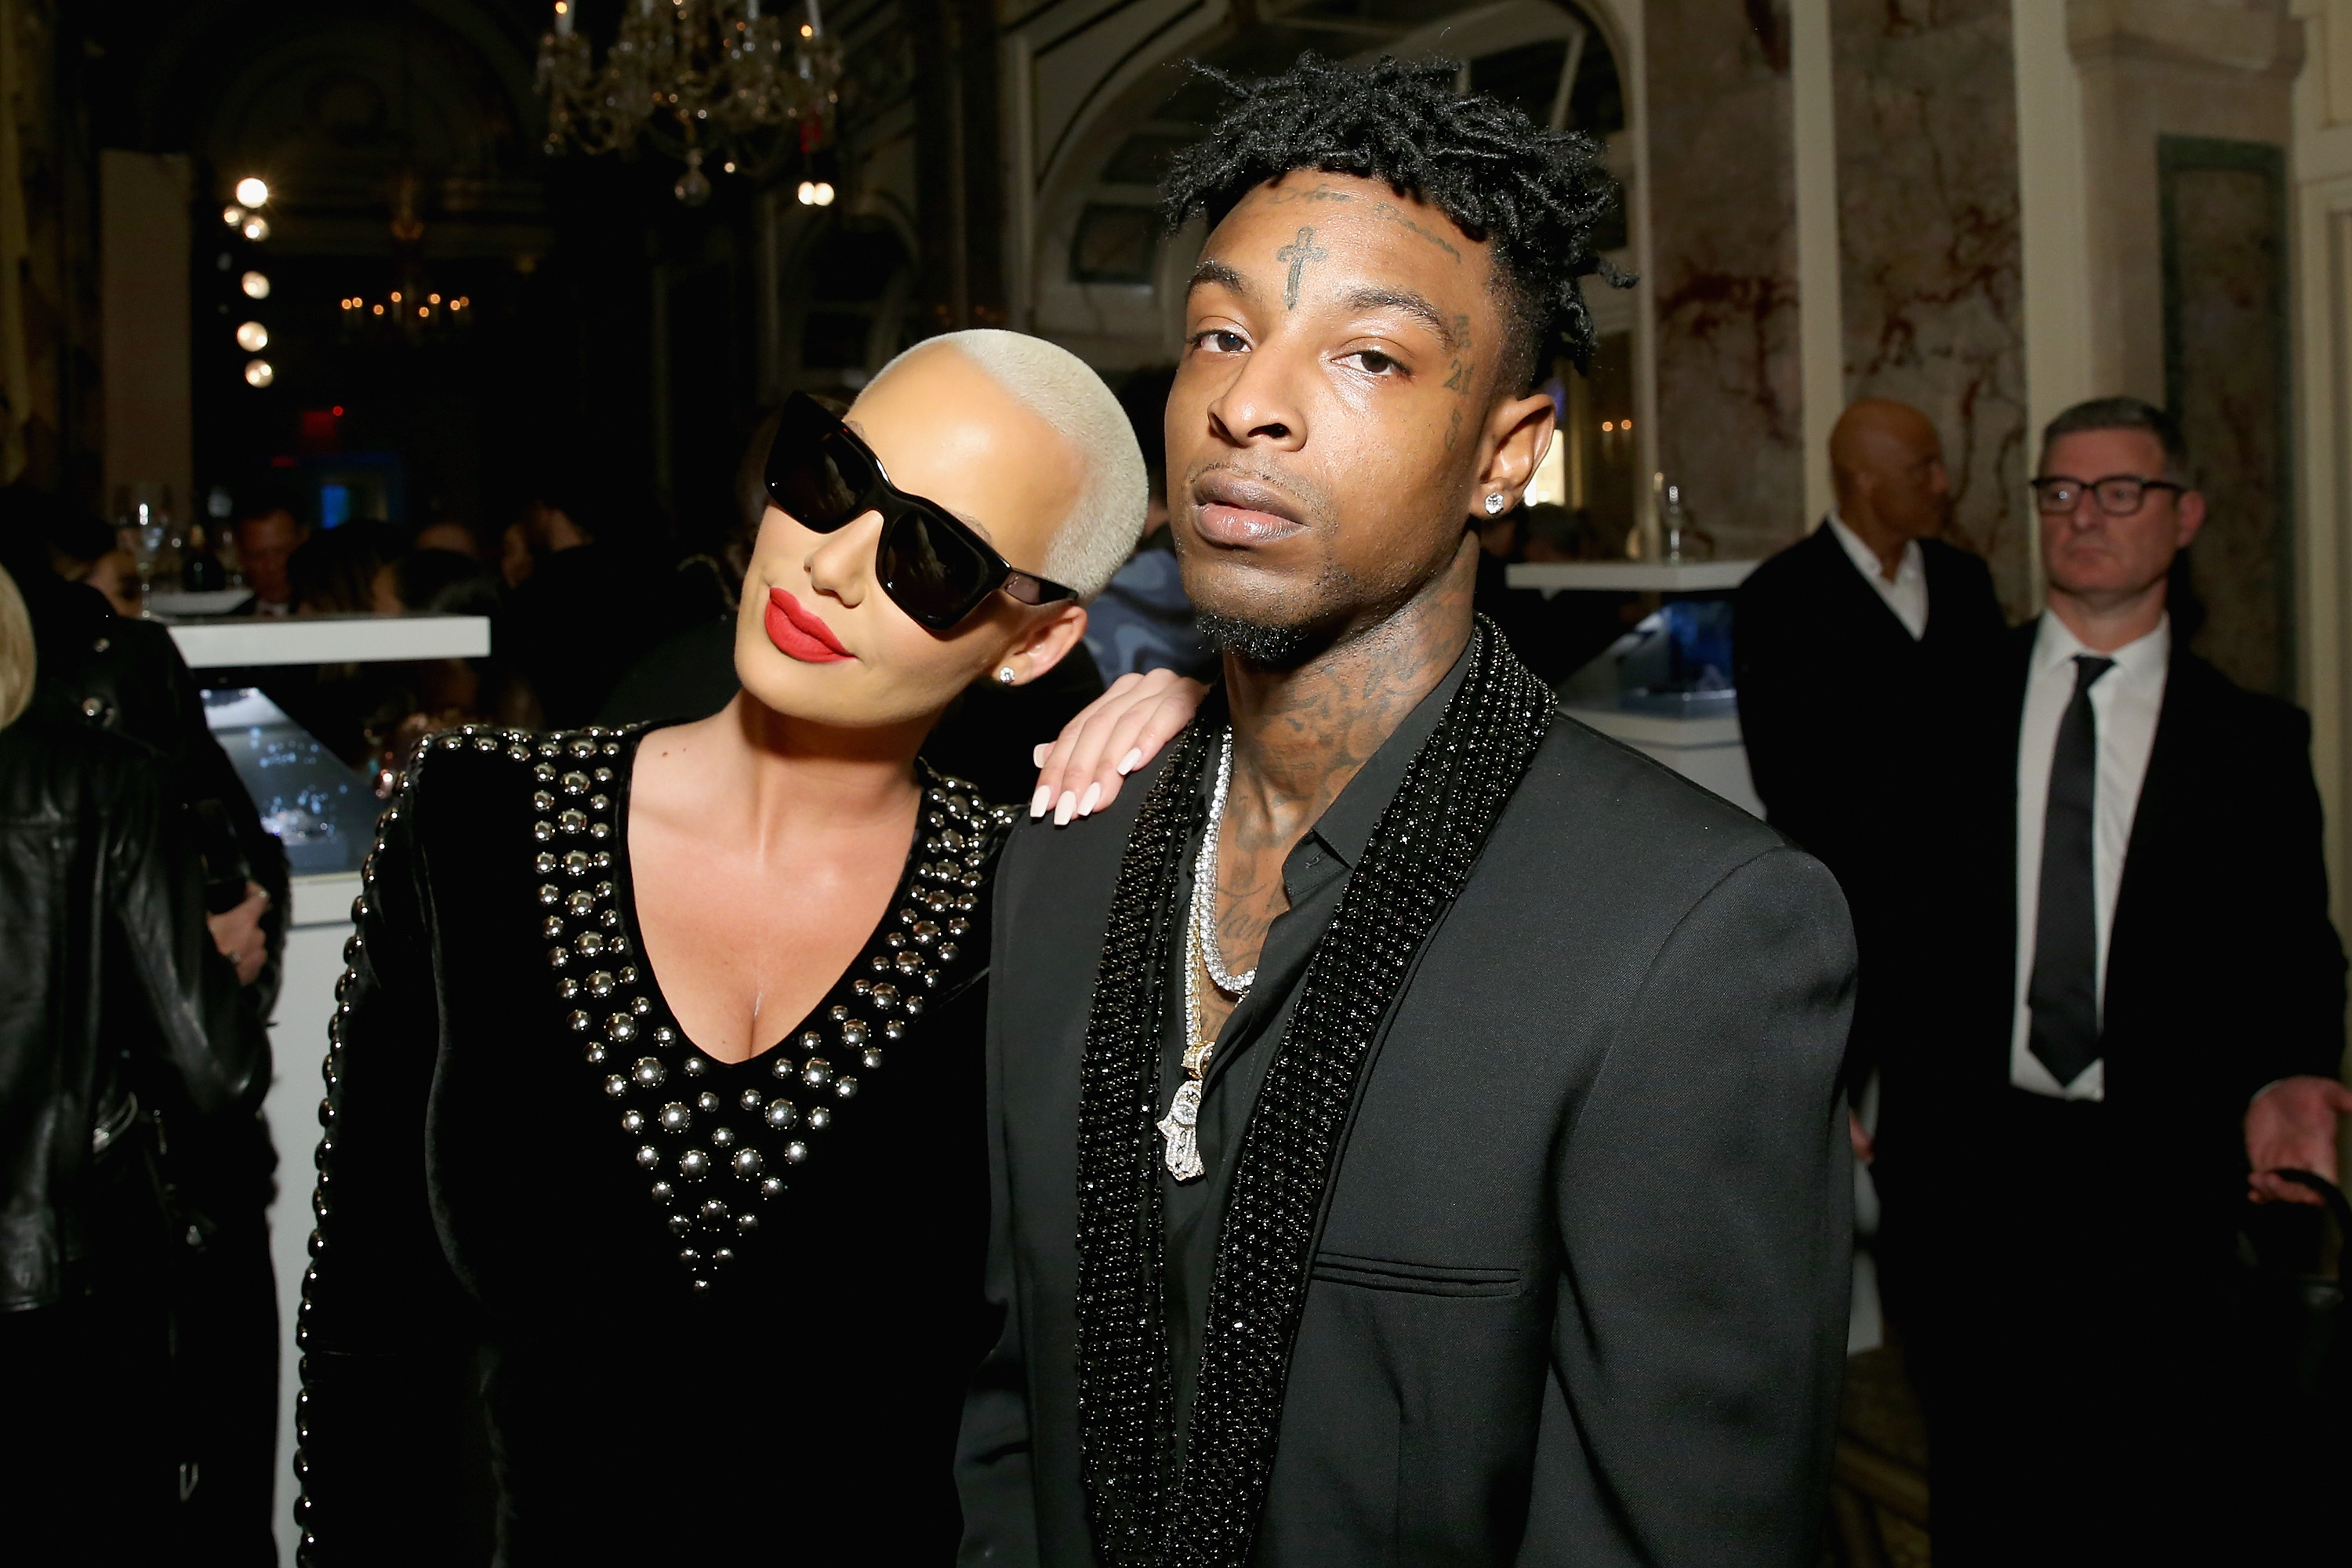 Amber Rose and rapper 21 Savage ignore one another at Coachella